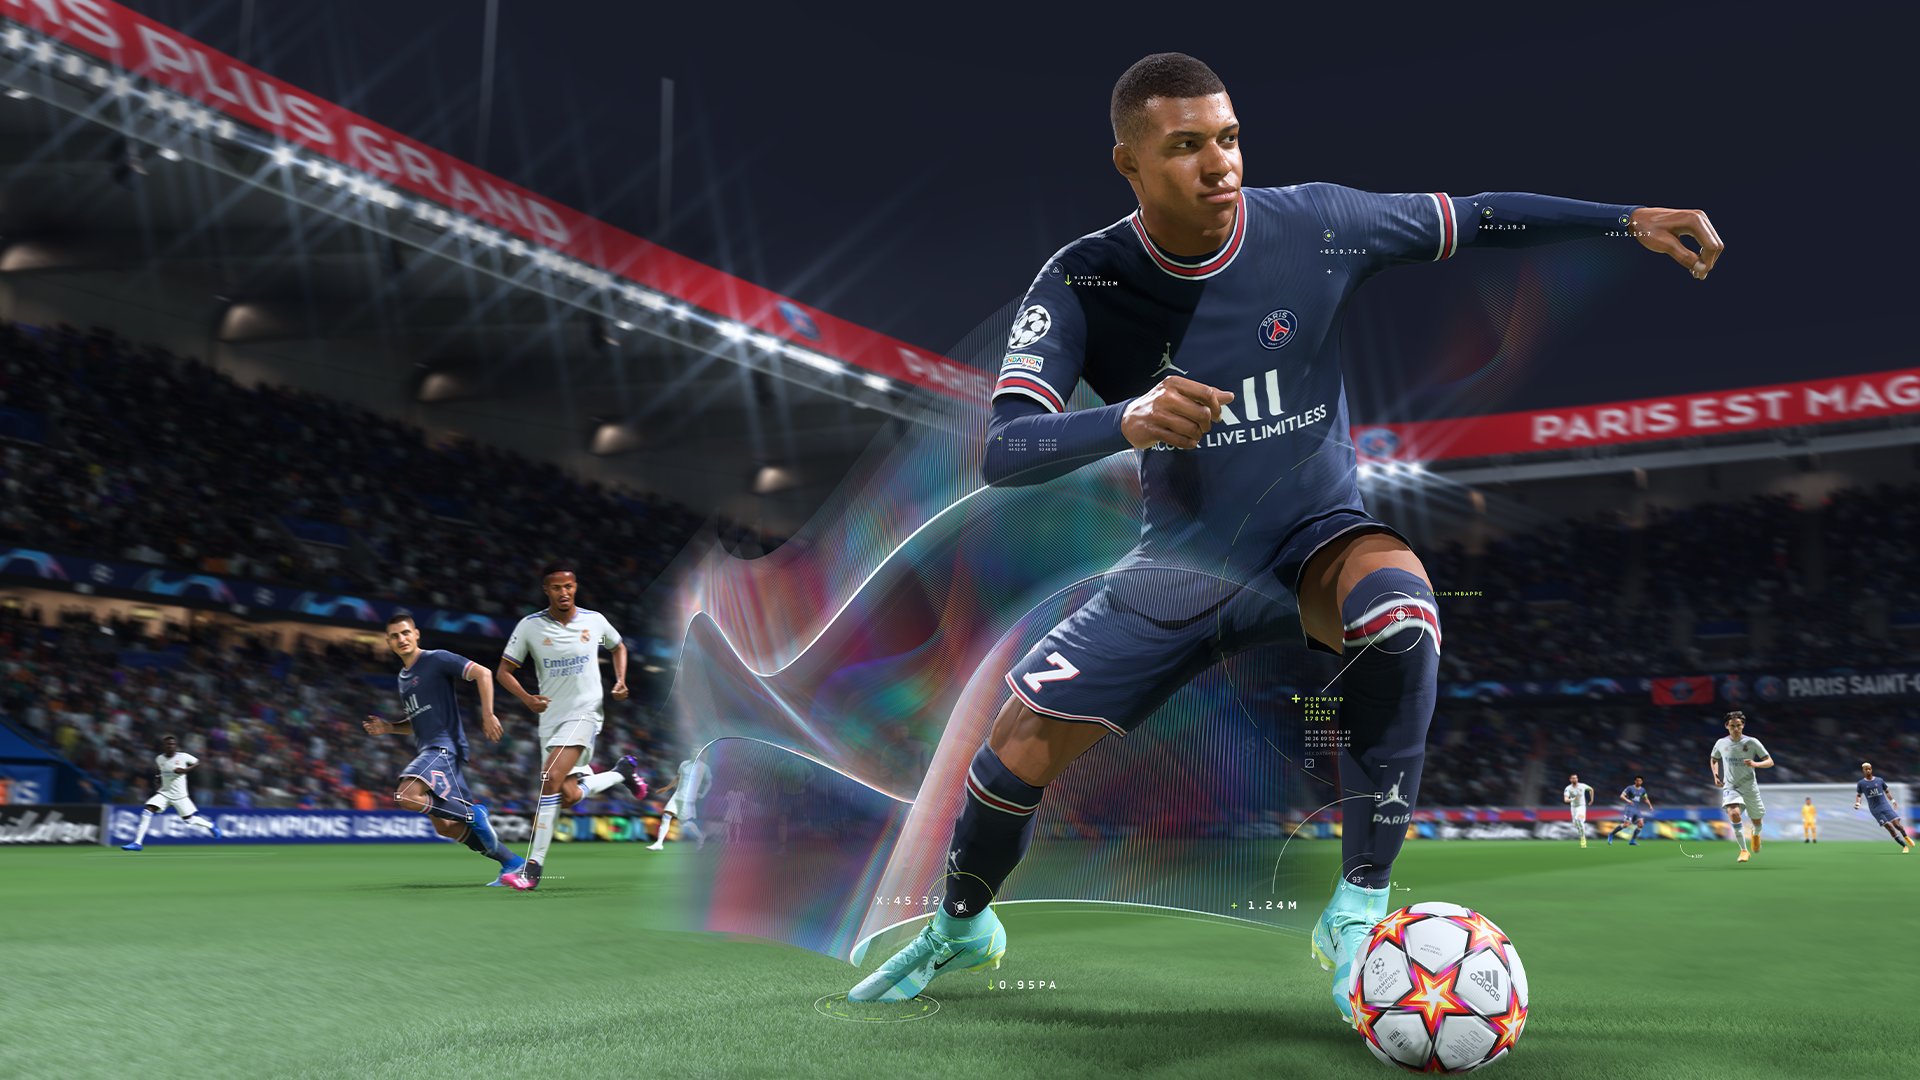 ⭐️[TOP]⭐️ FIFA 2022 Ultimate Edition - STEAM (GLOBAL)